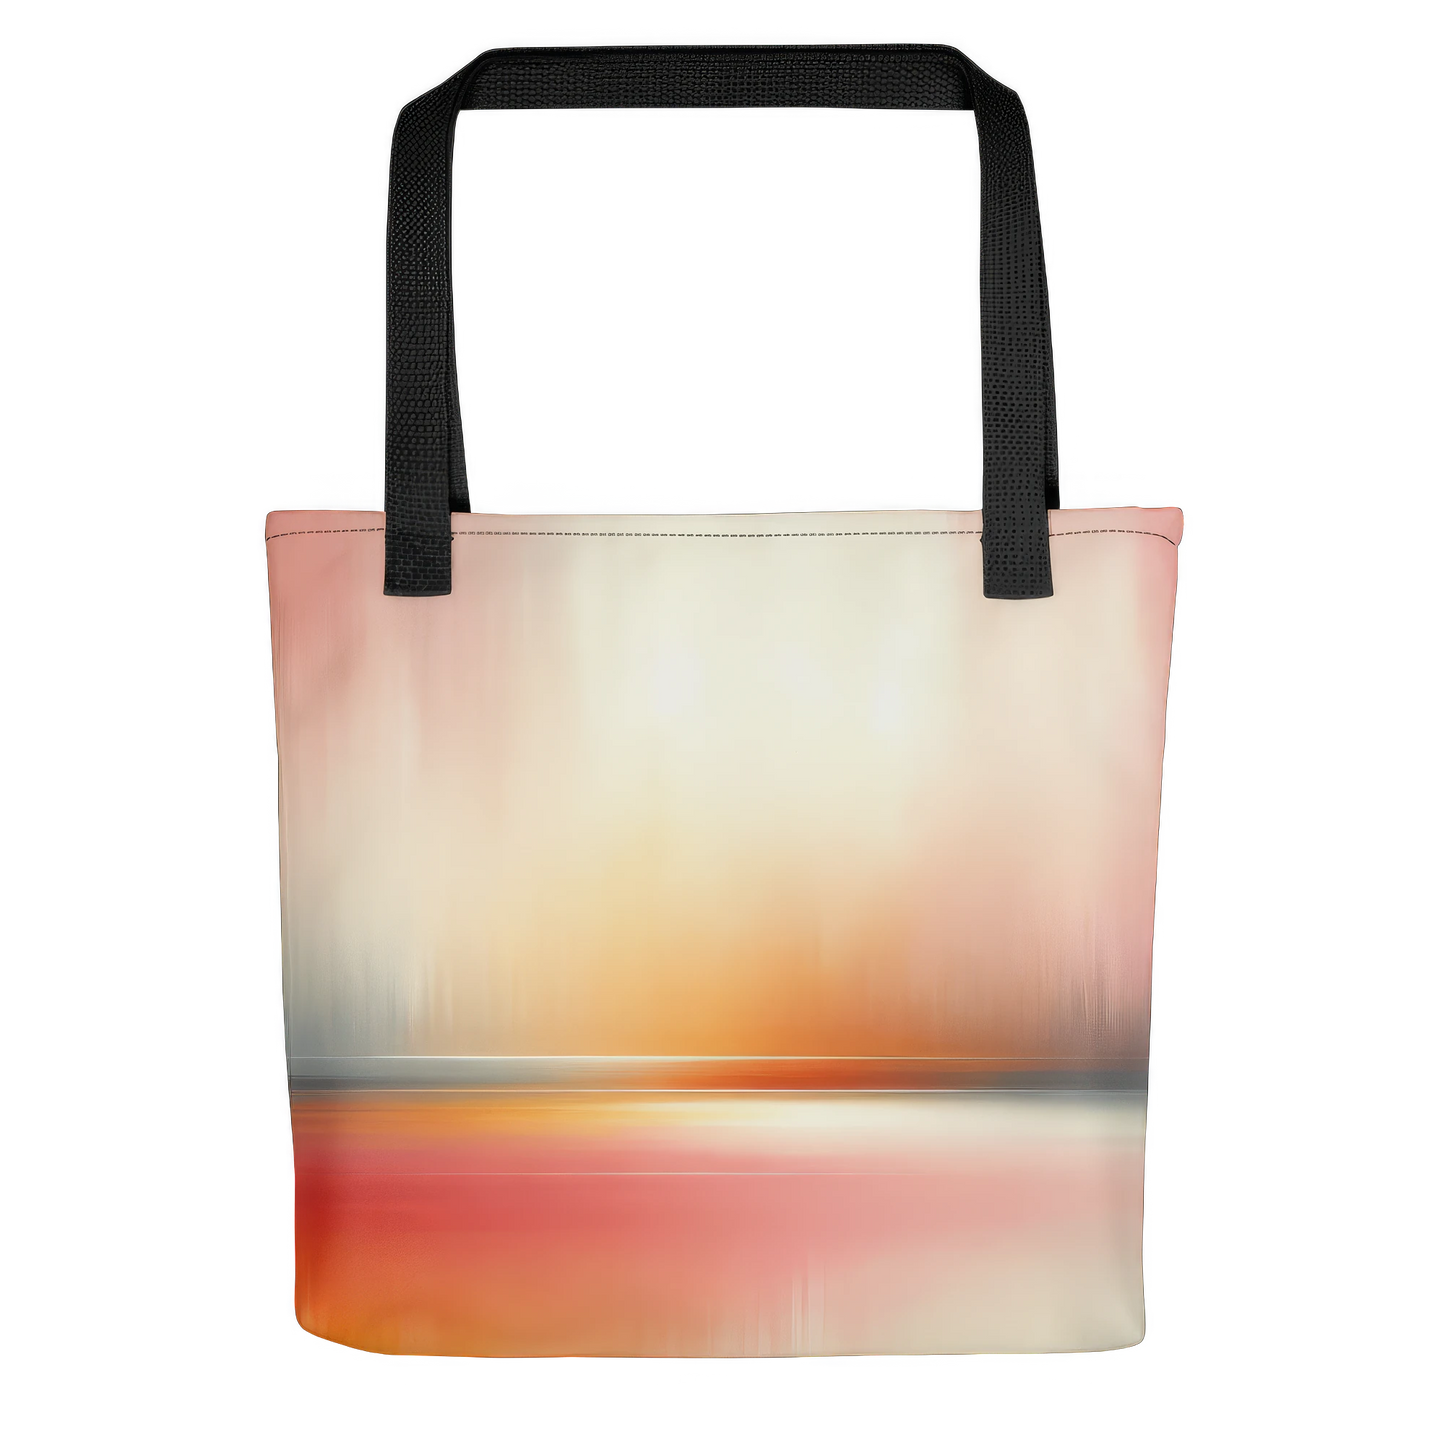 Abstract Art Tote Bag: The Serenity of Now